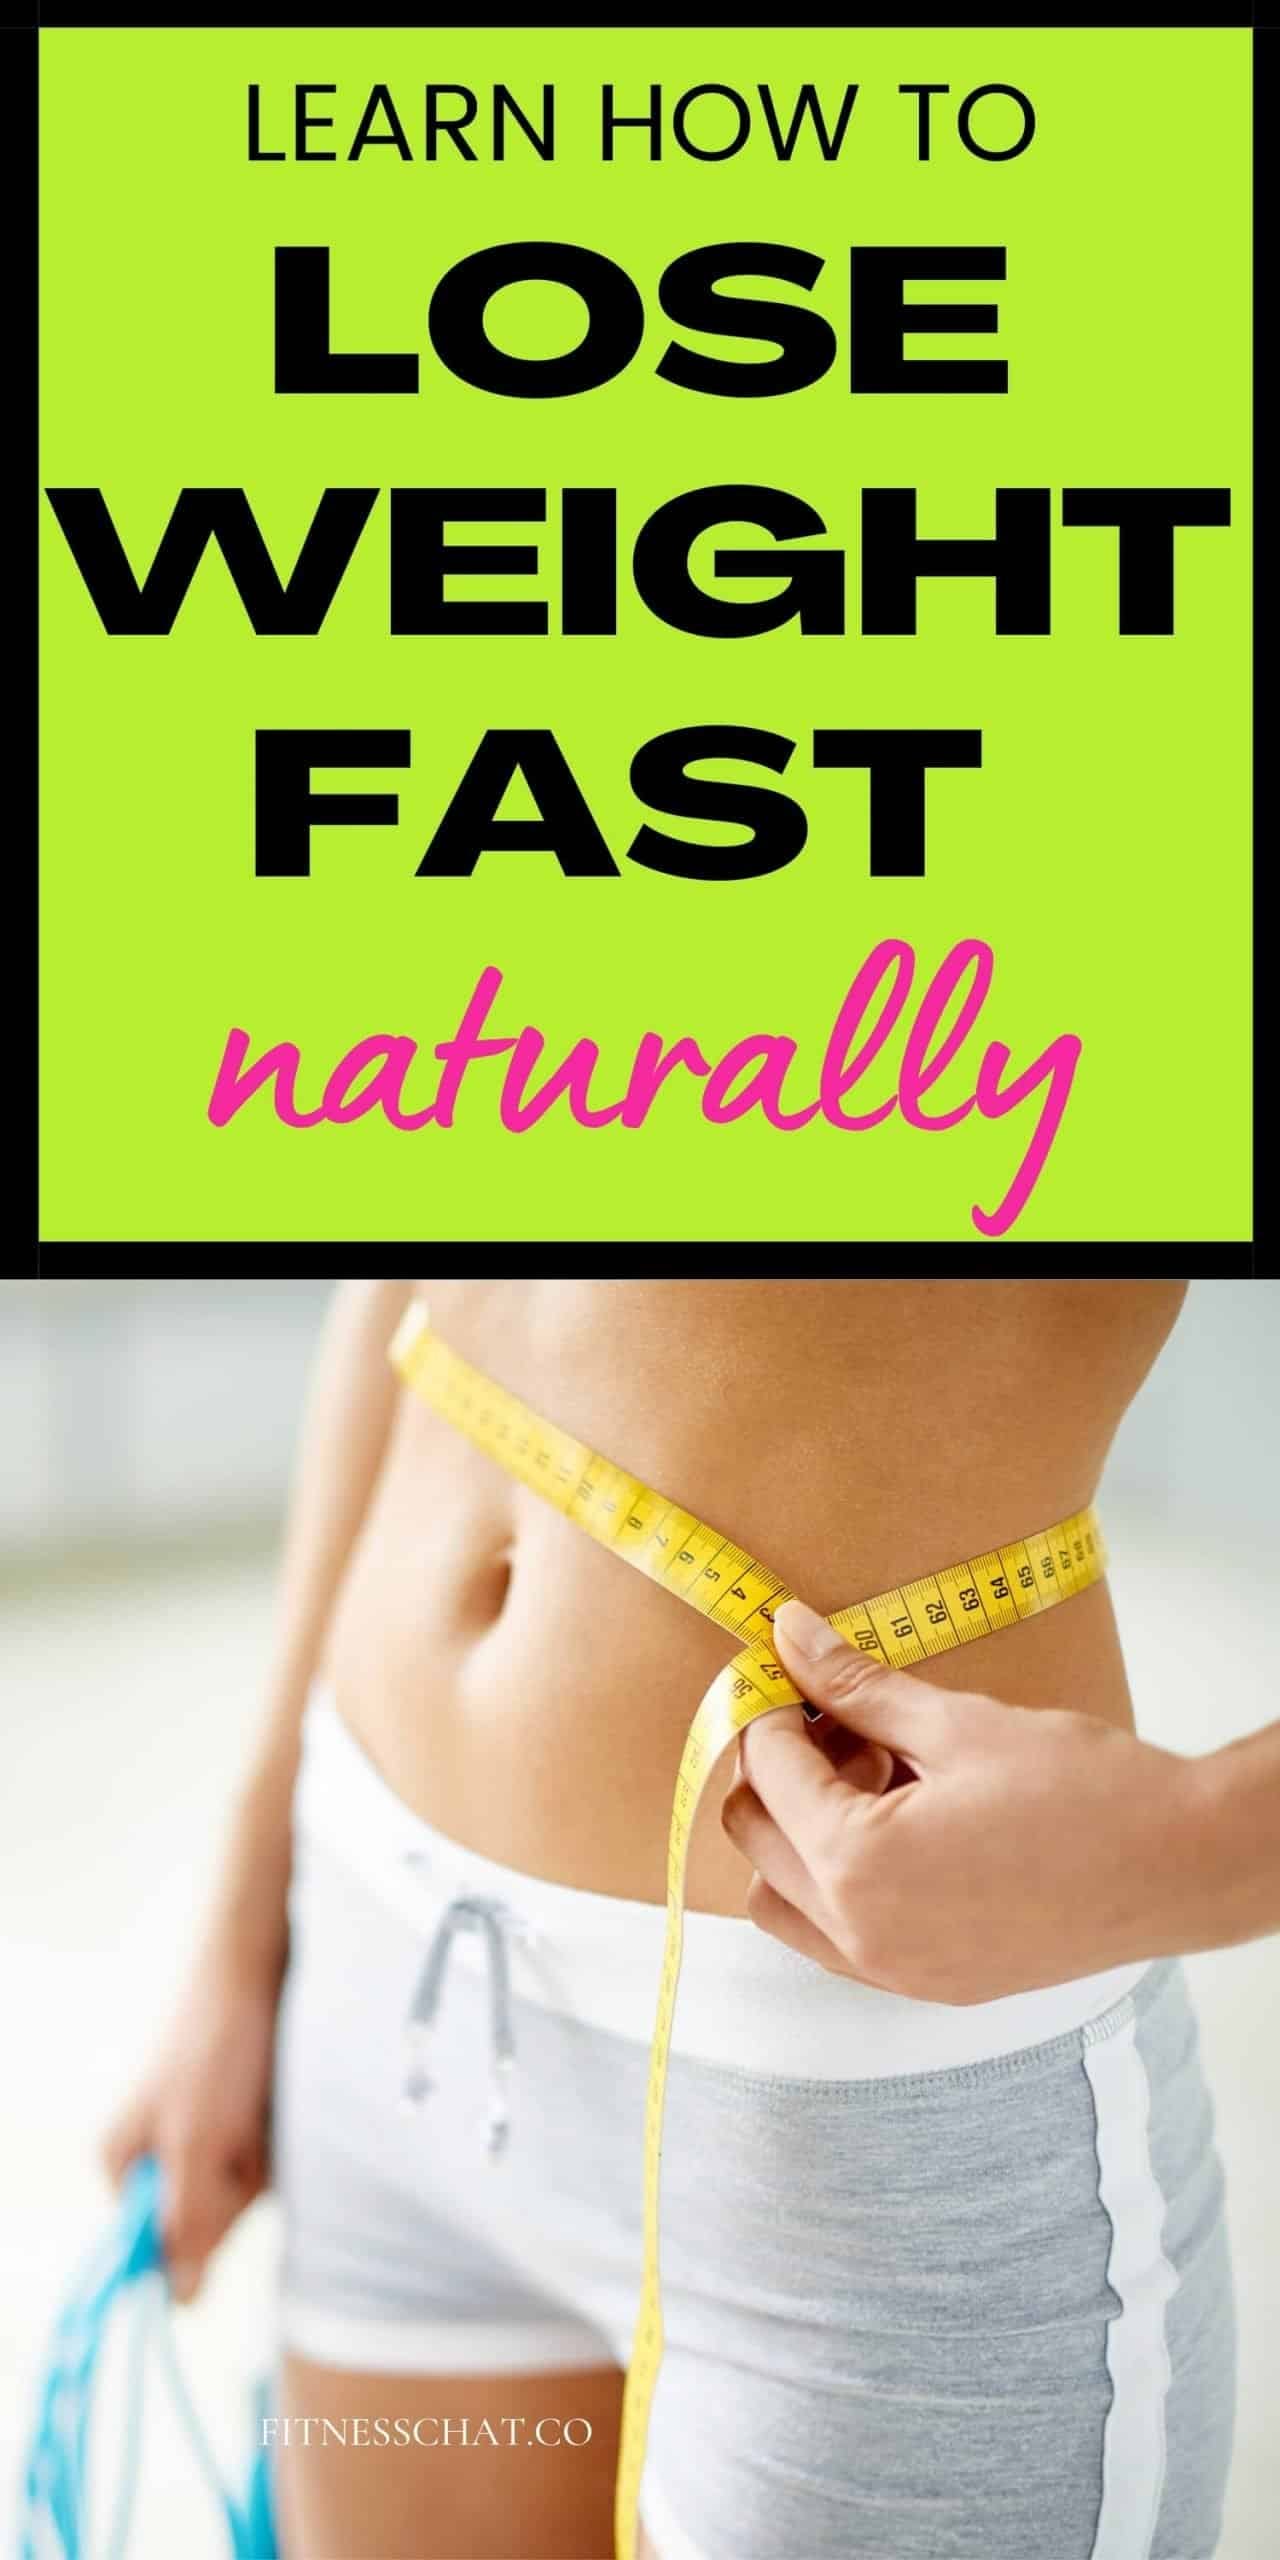 Proven Ways for How to Lose Weight Fast According to Science., by  Jemohgwax